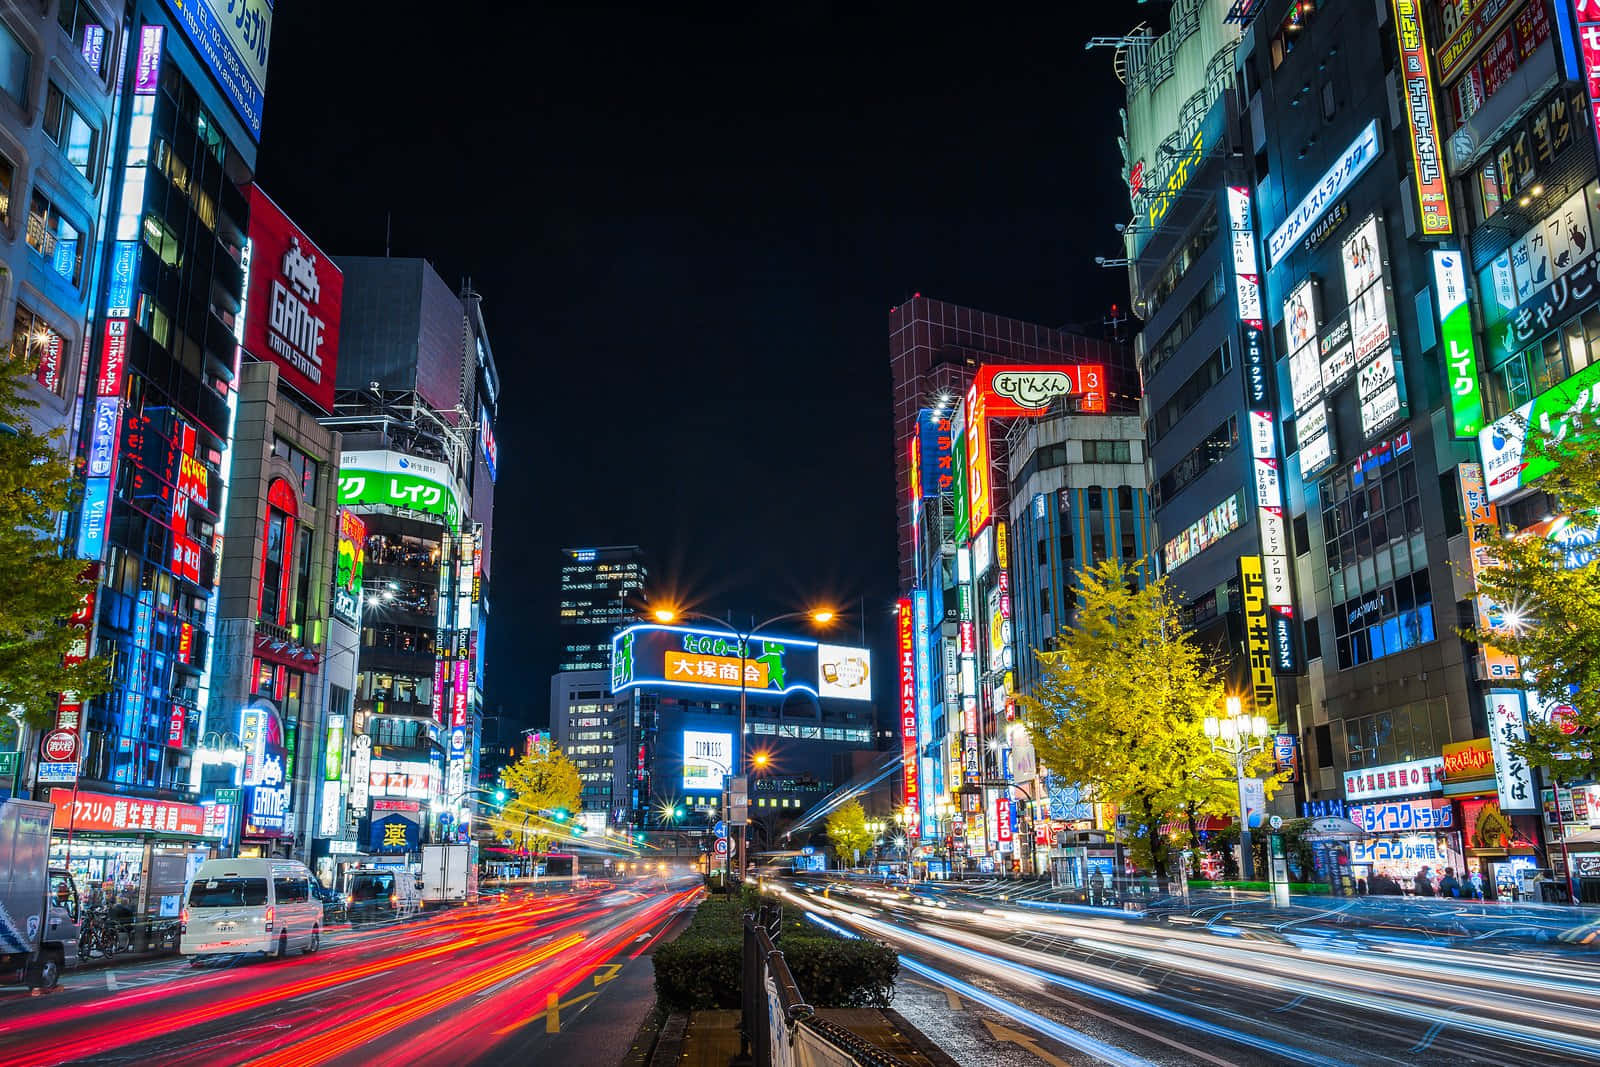 The lively city lights of Tokyo